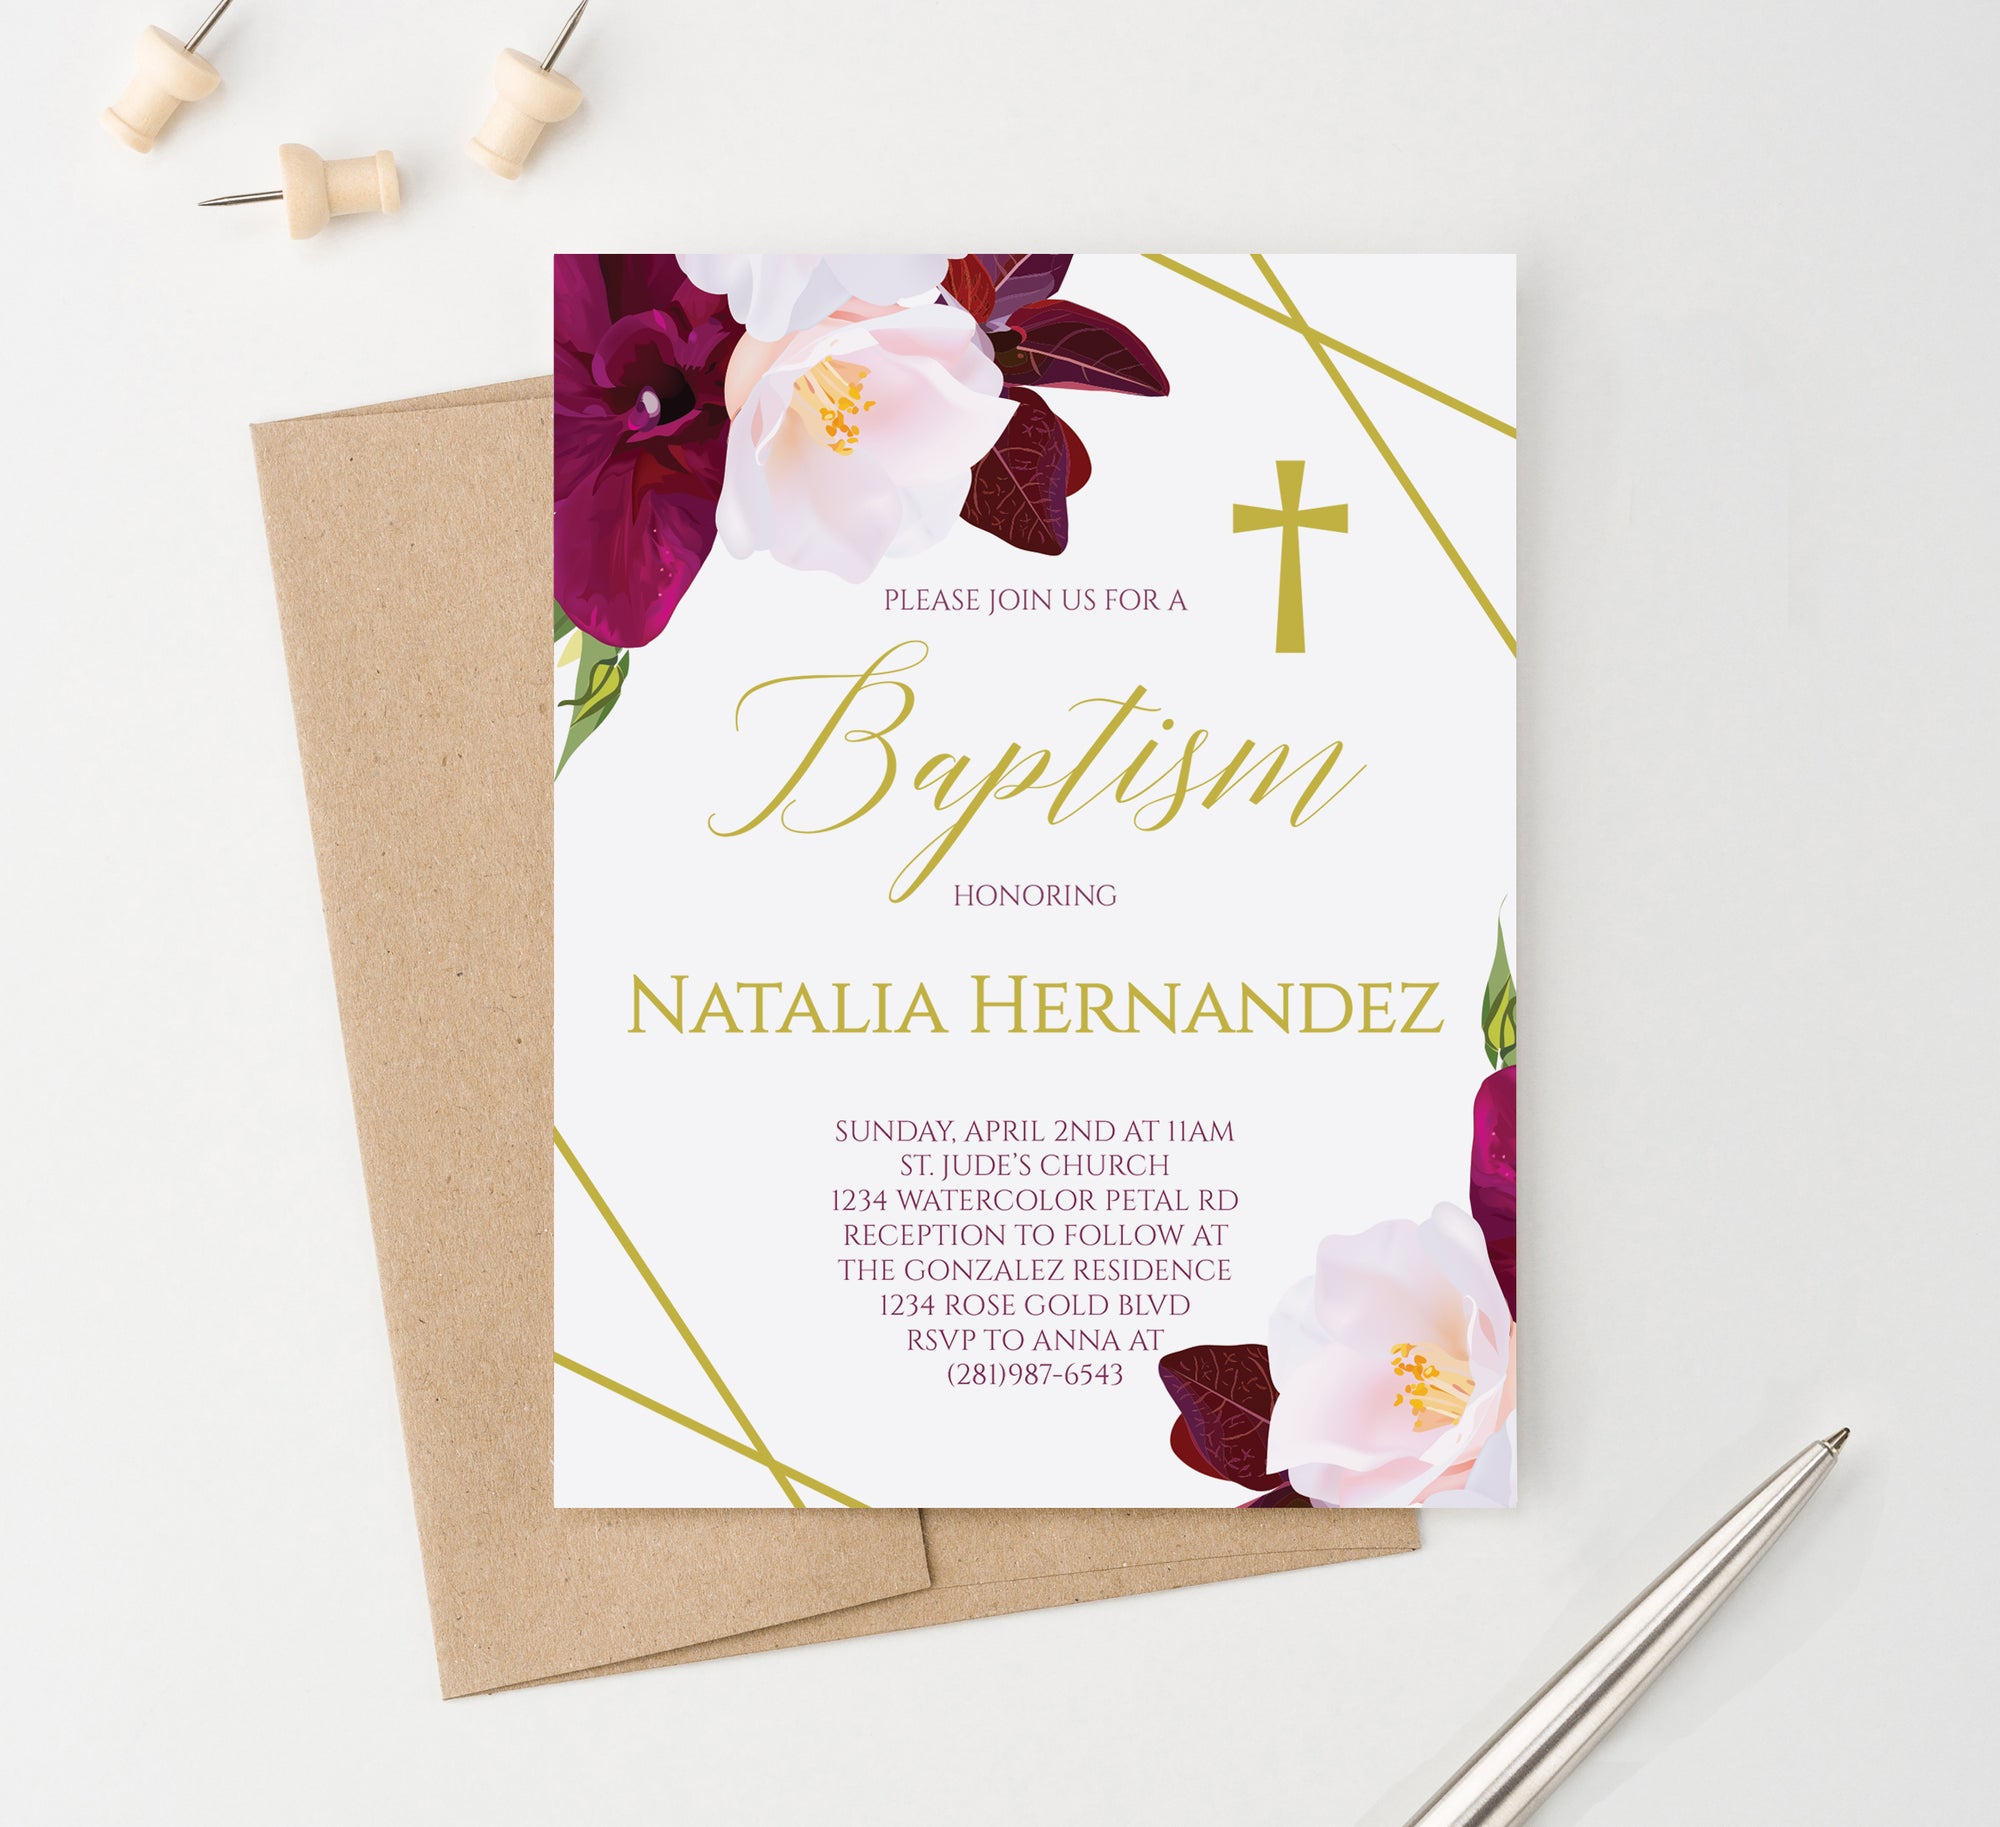 Personalized Burgundy And Gold Baptism Invites With Florals